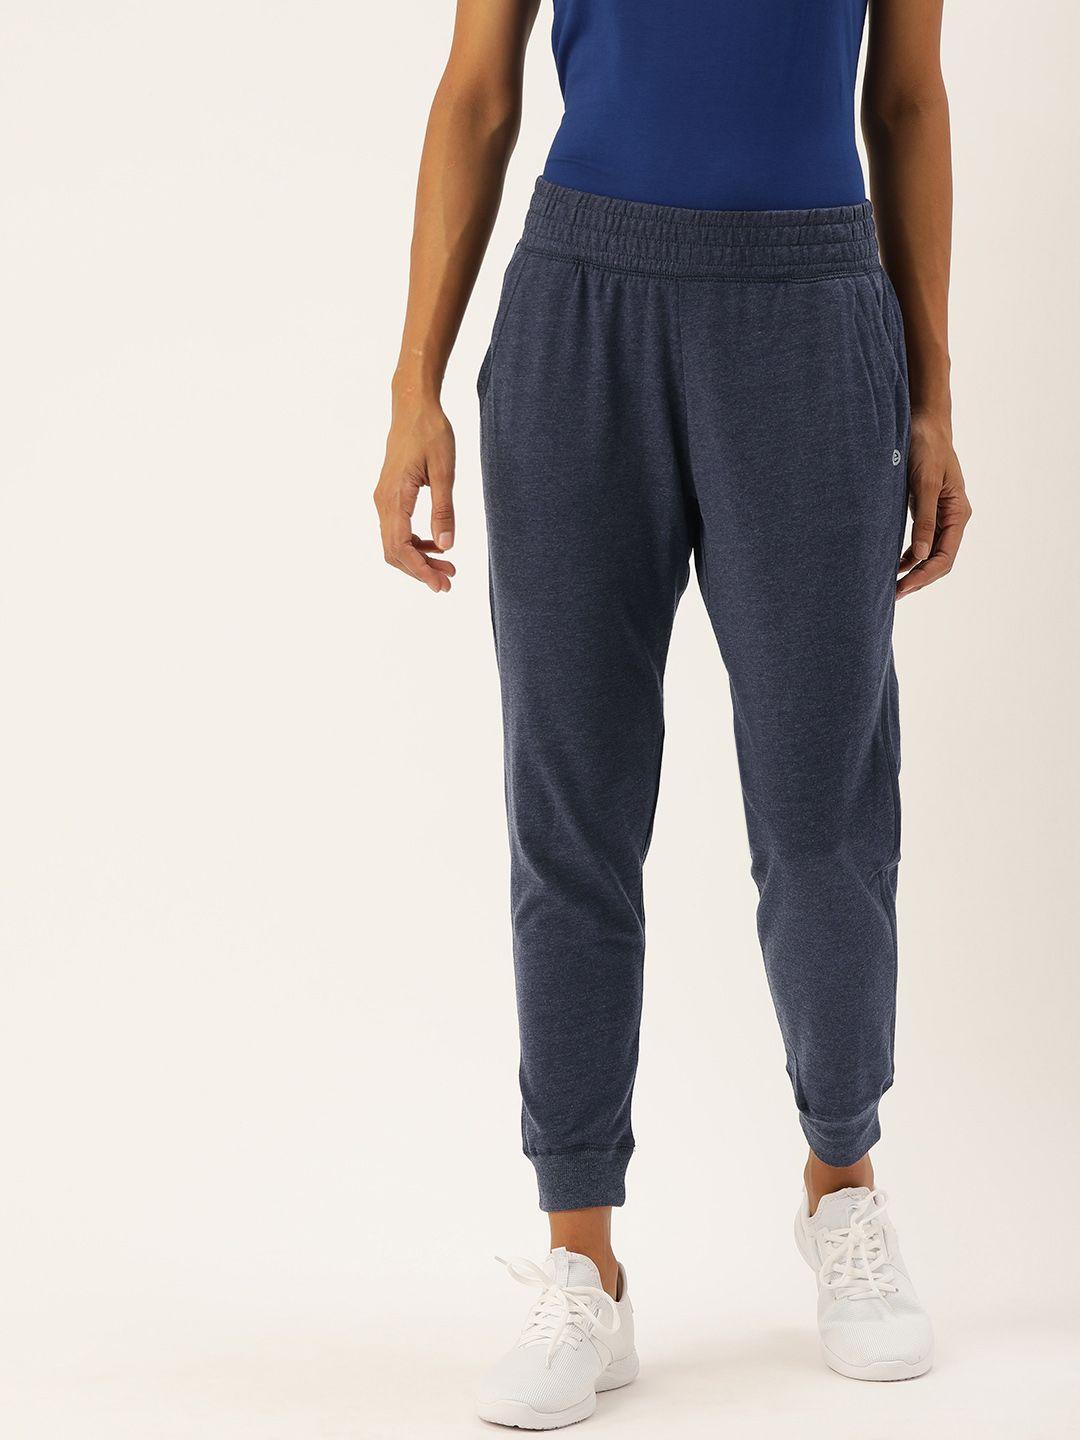 enamor women navy blue relaxed fit comfy lounge joggers